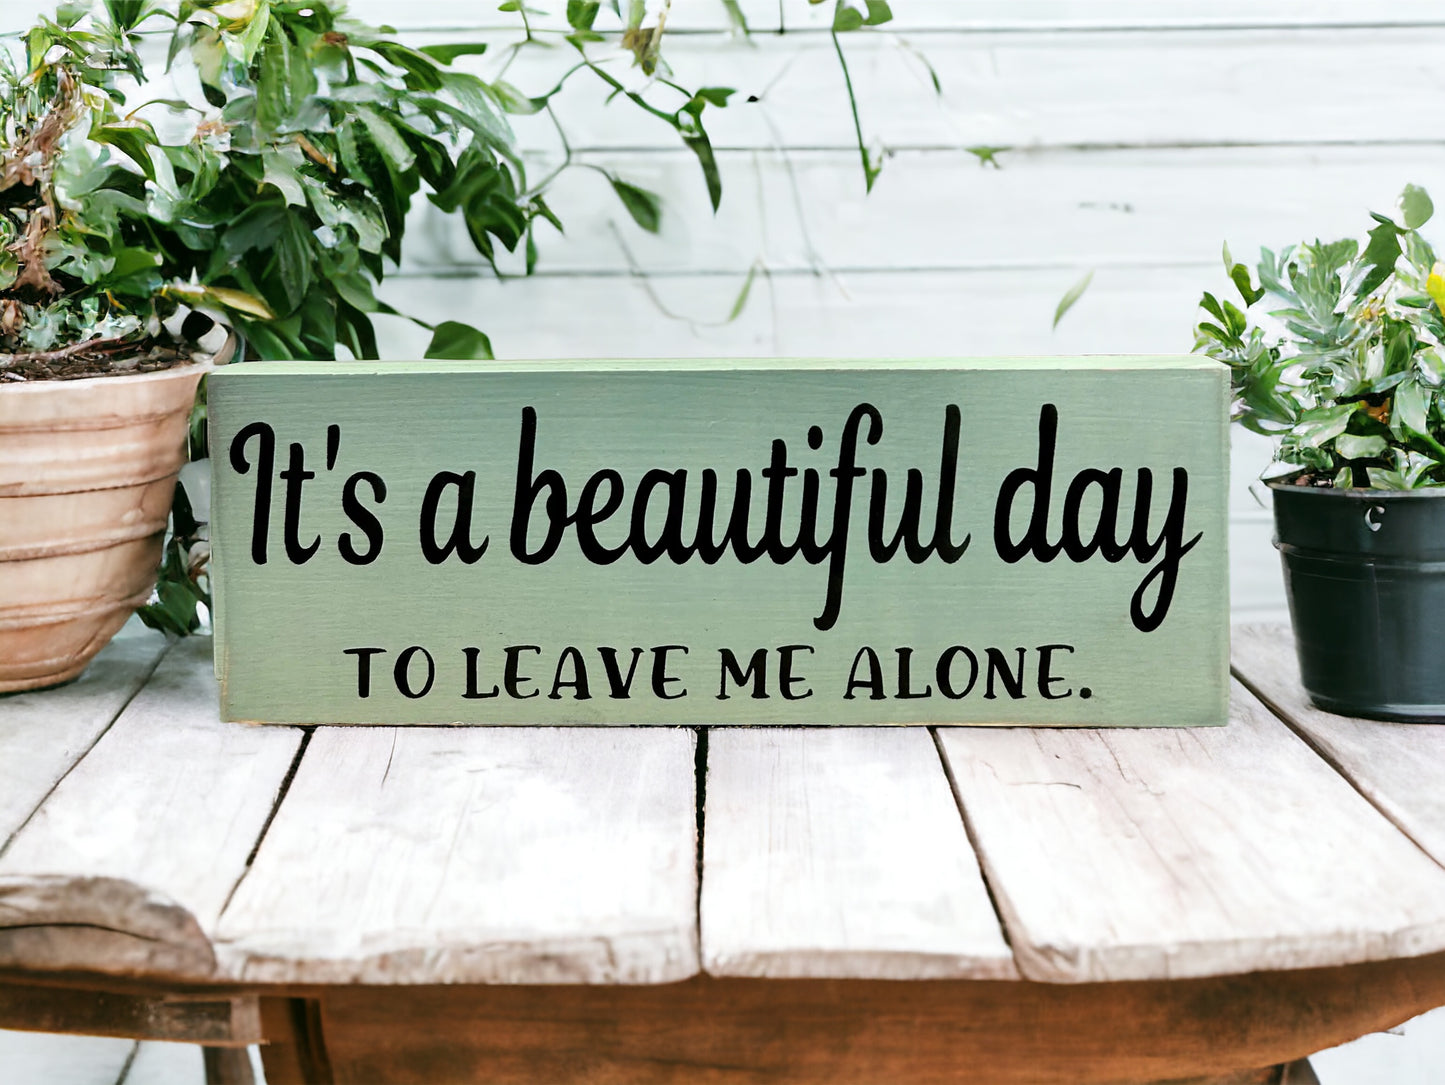 "Beautiful day" wood sign